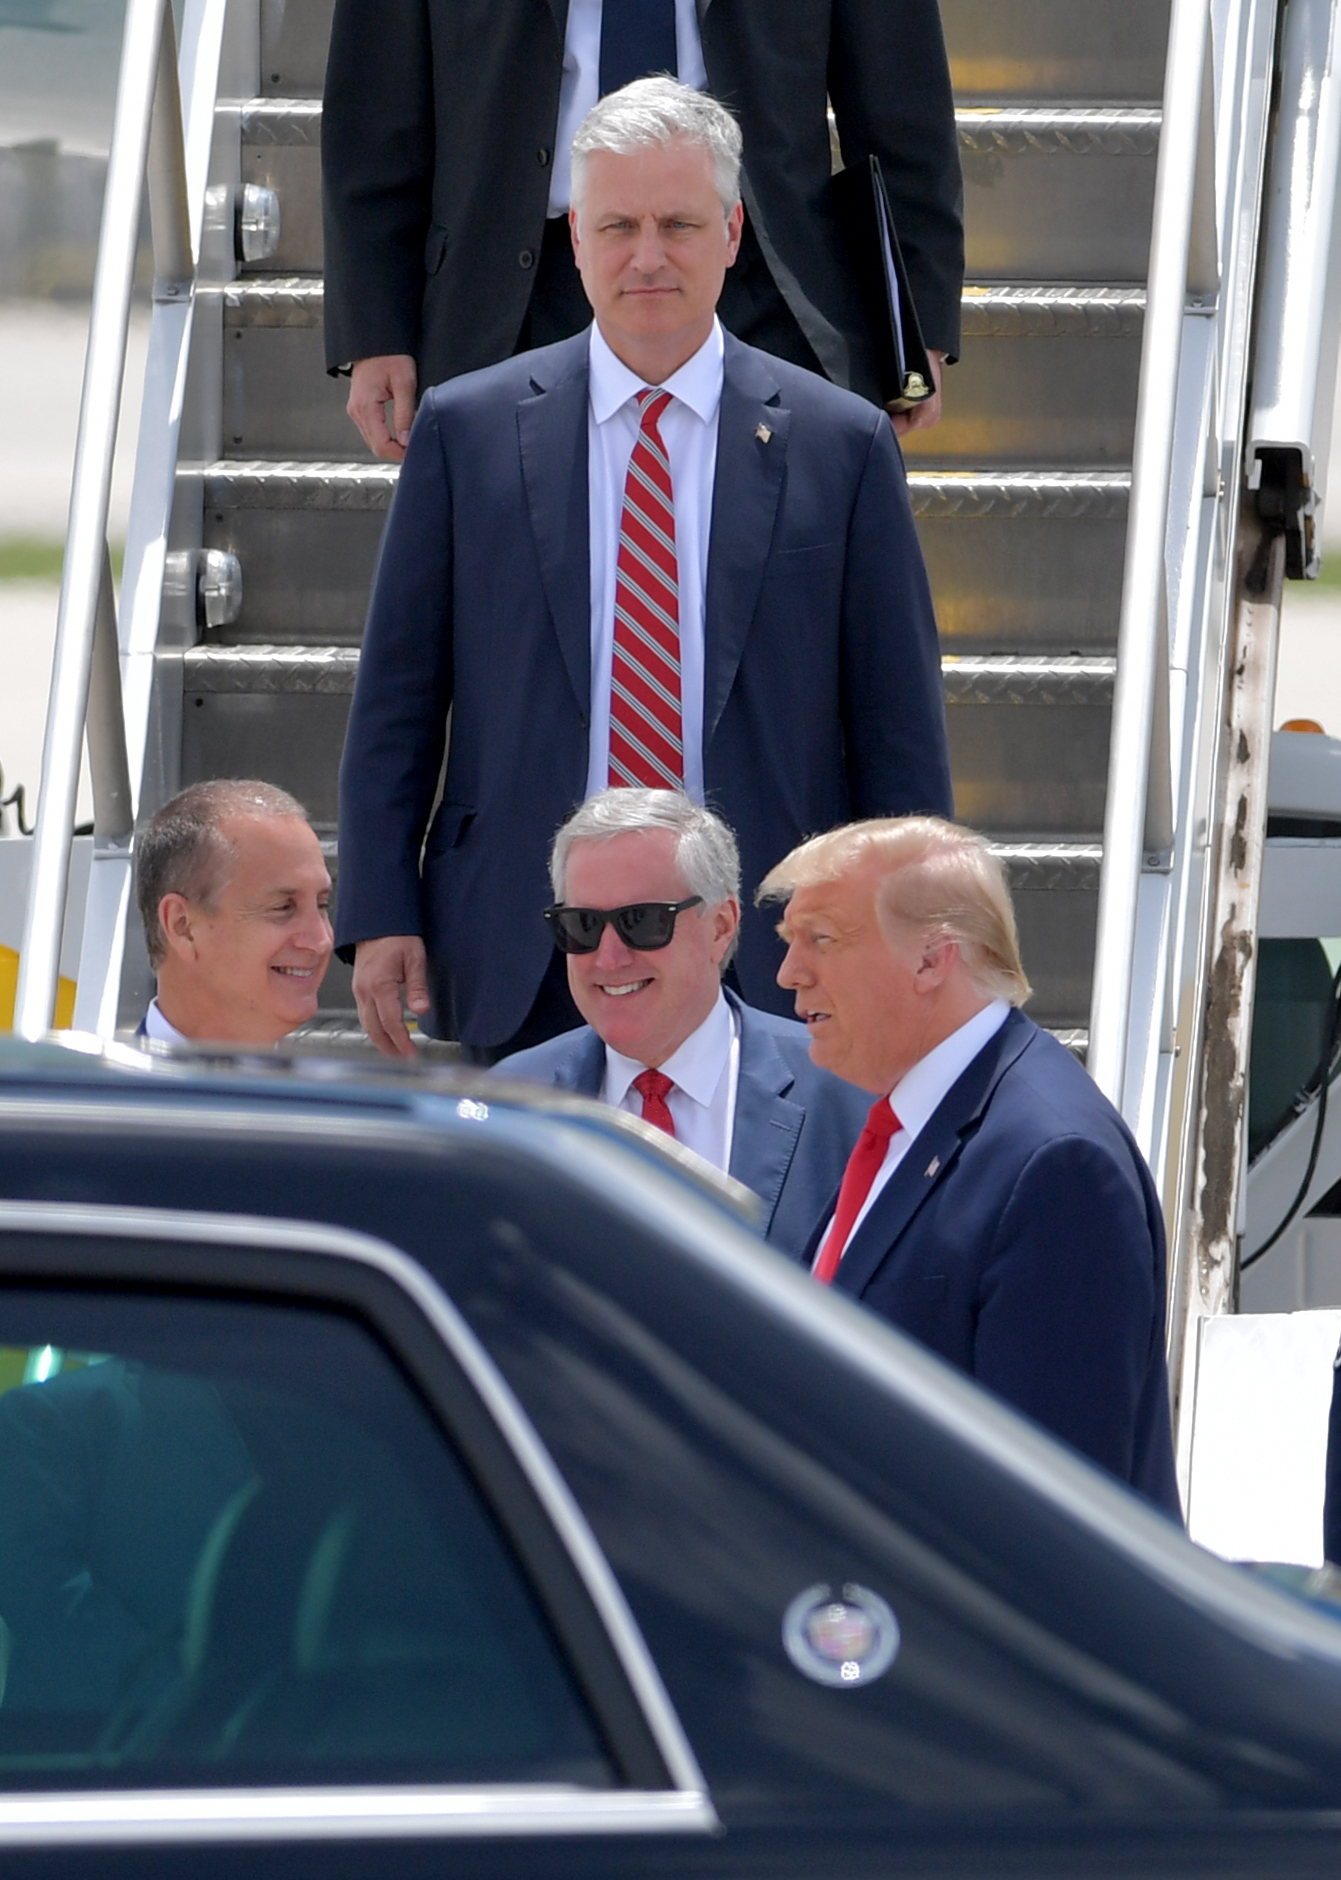 PHOTO: President Donald Trump arriving at Miami International Airport on July 10, 2020 in Miami, Florida.